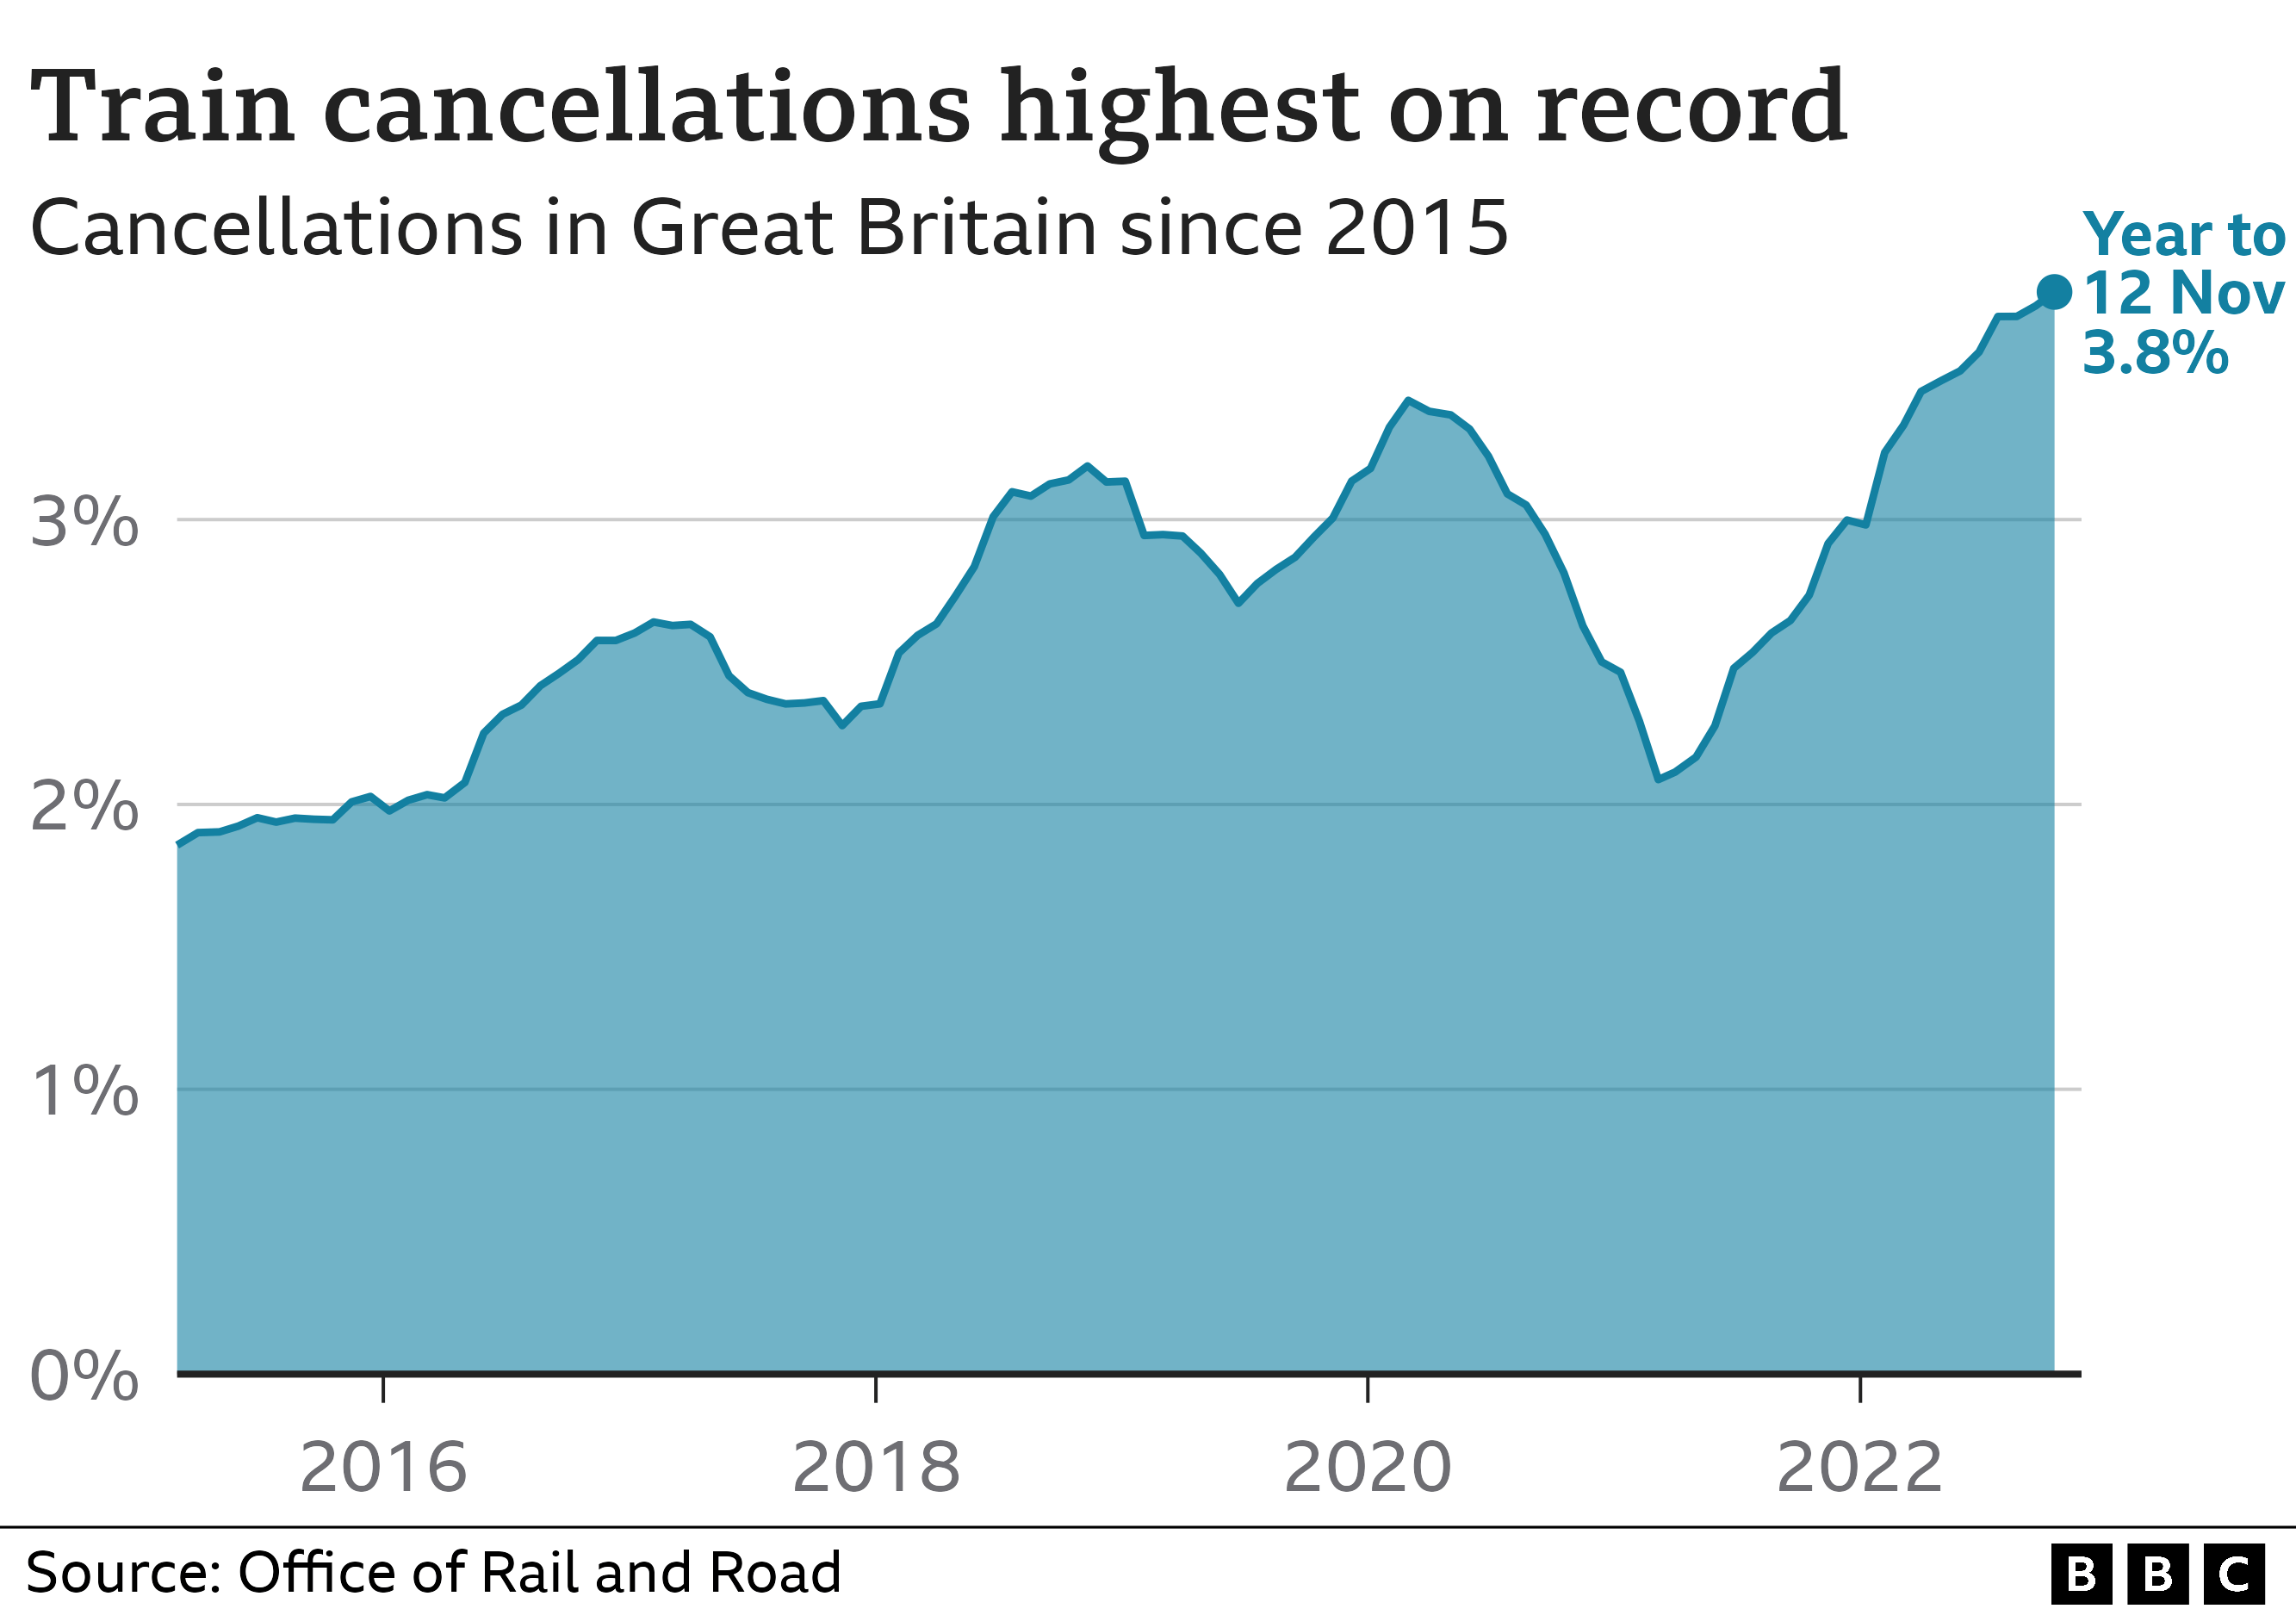 Train cancellations over time graph